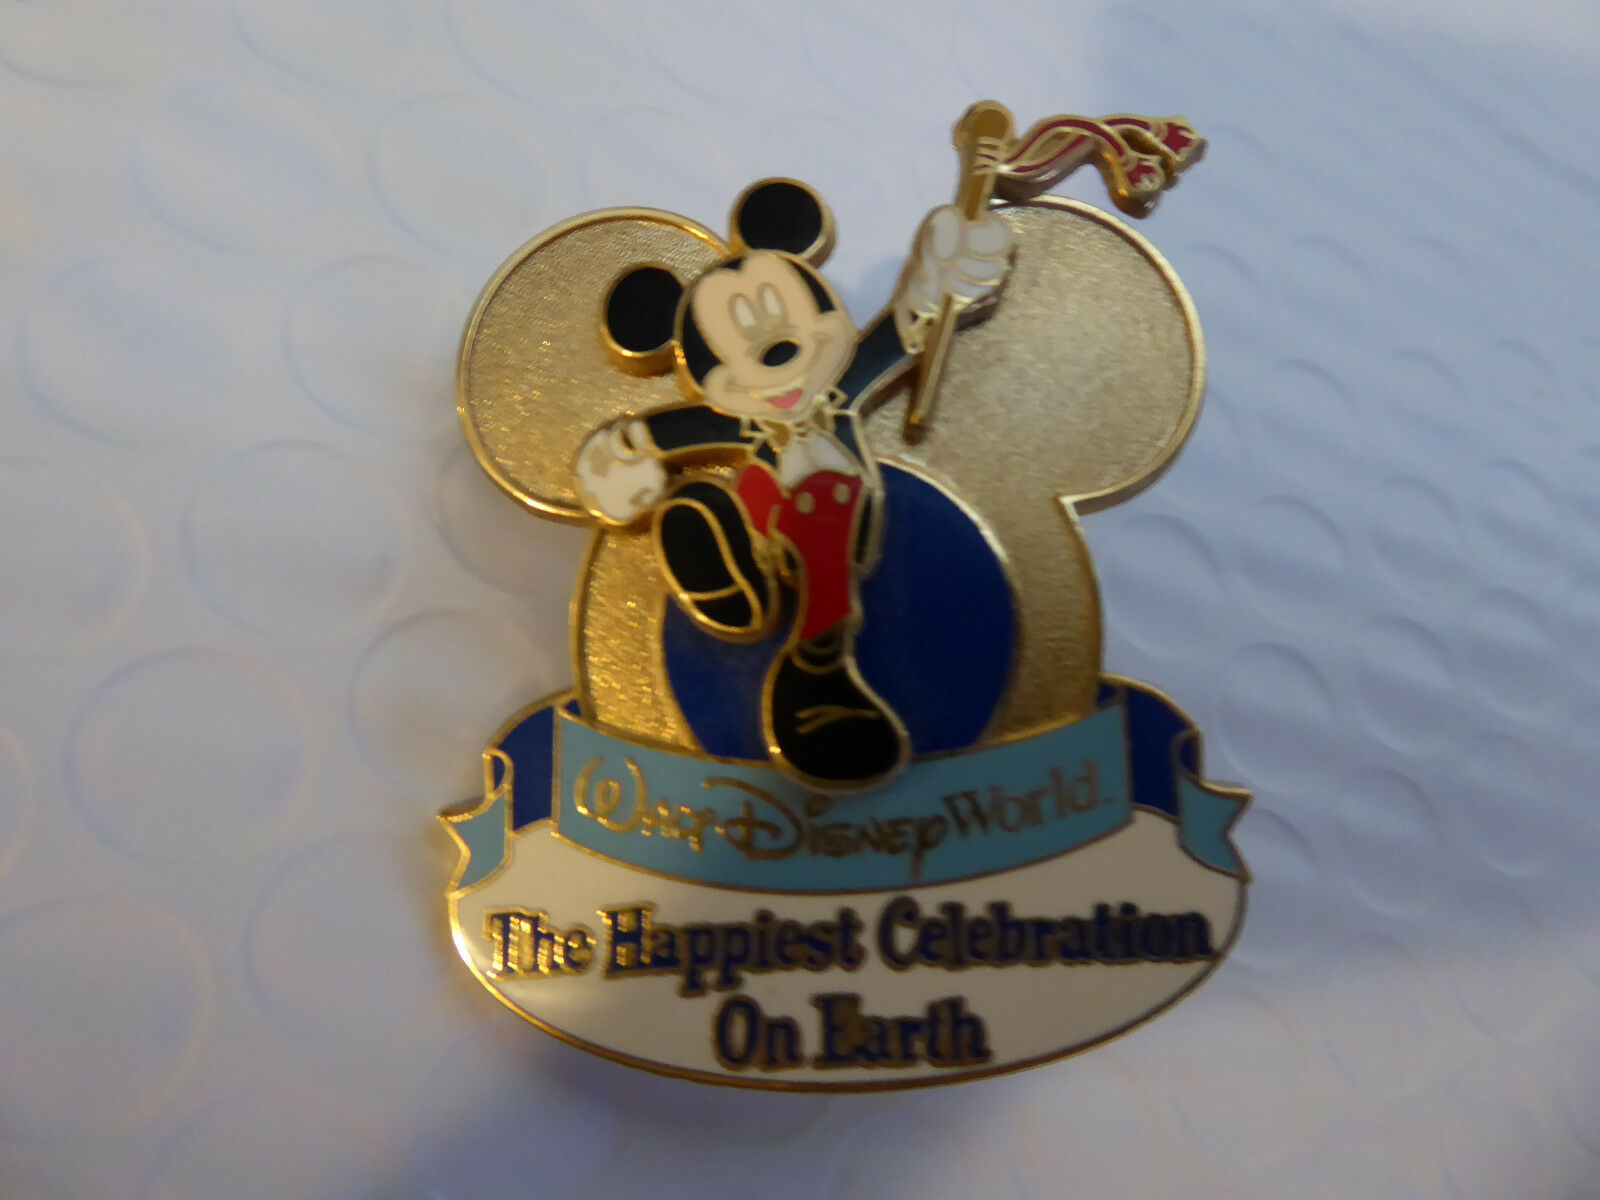 Disney Trading Broches 41007 Happiest Célébration Sur Terre (Mickey Mouse) - $9.55